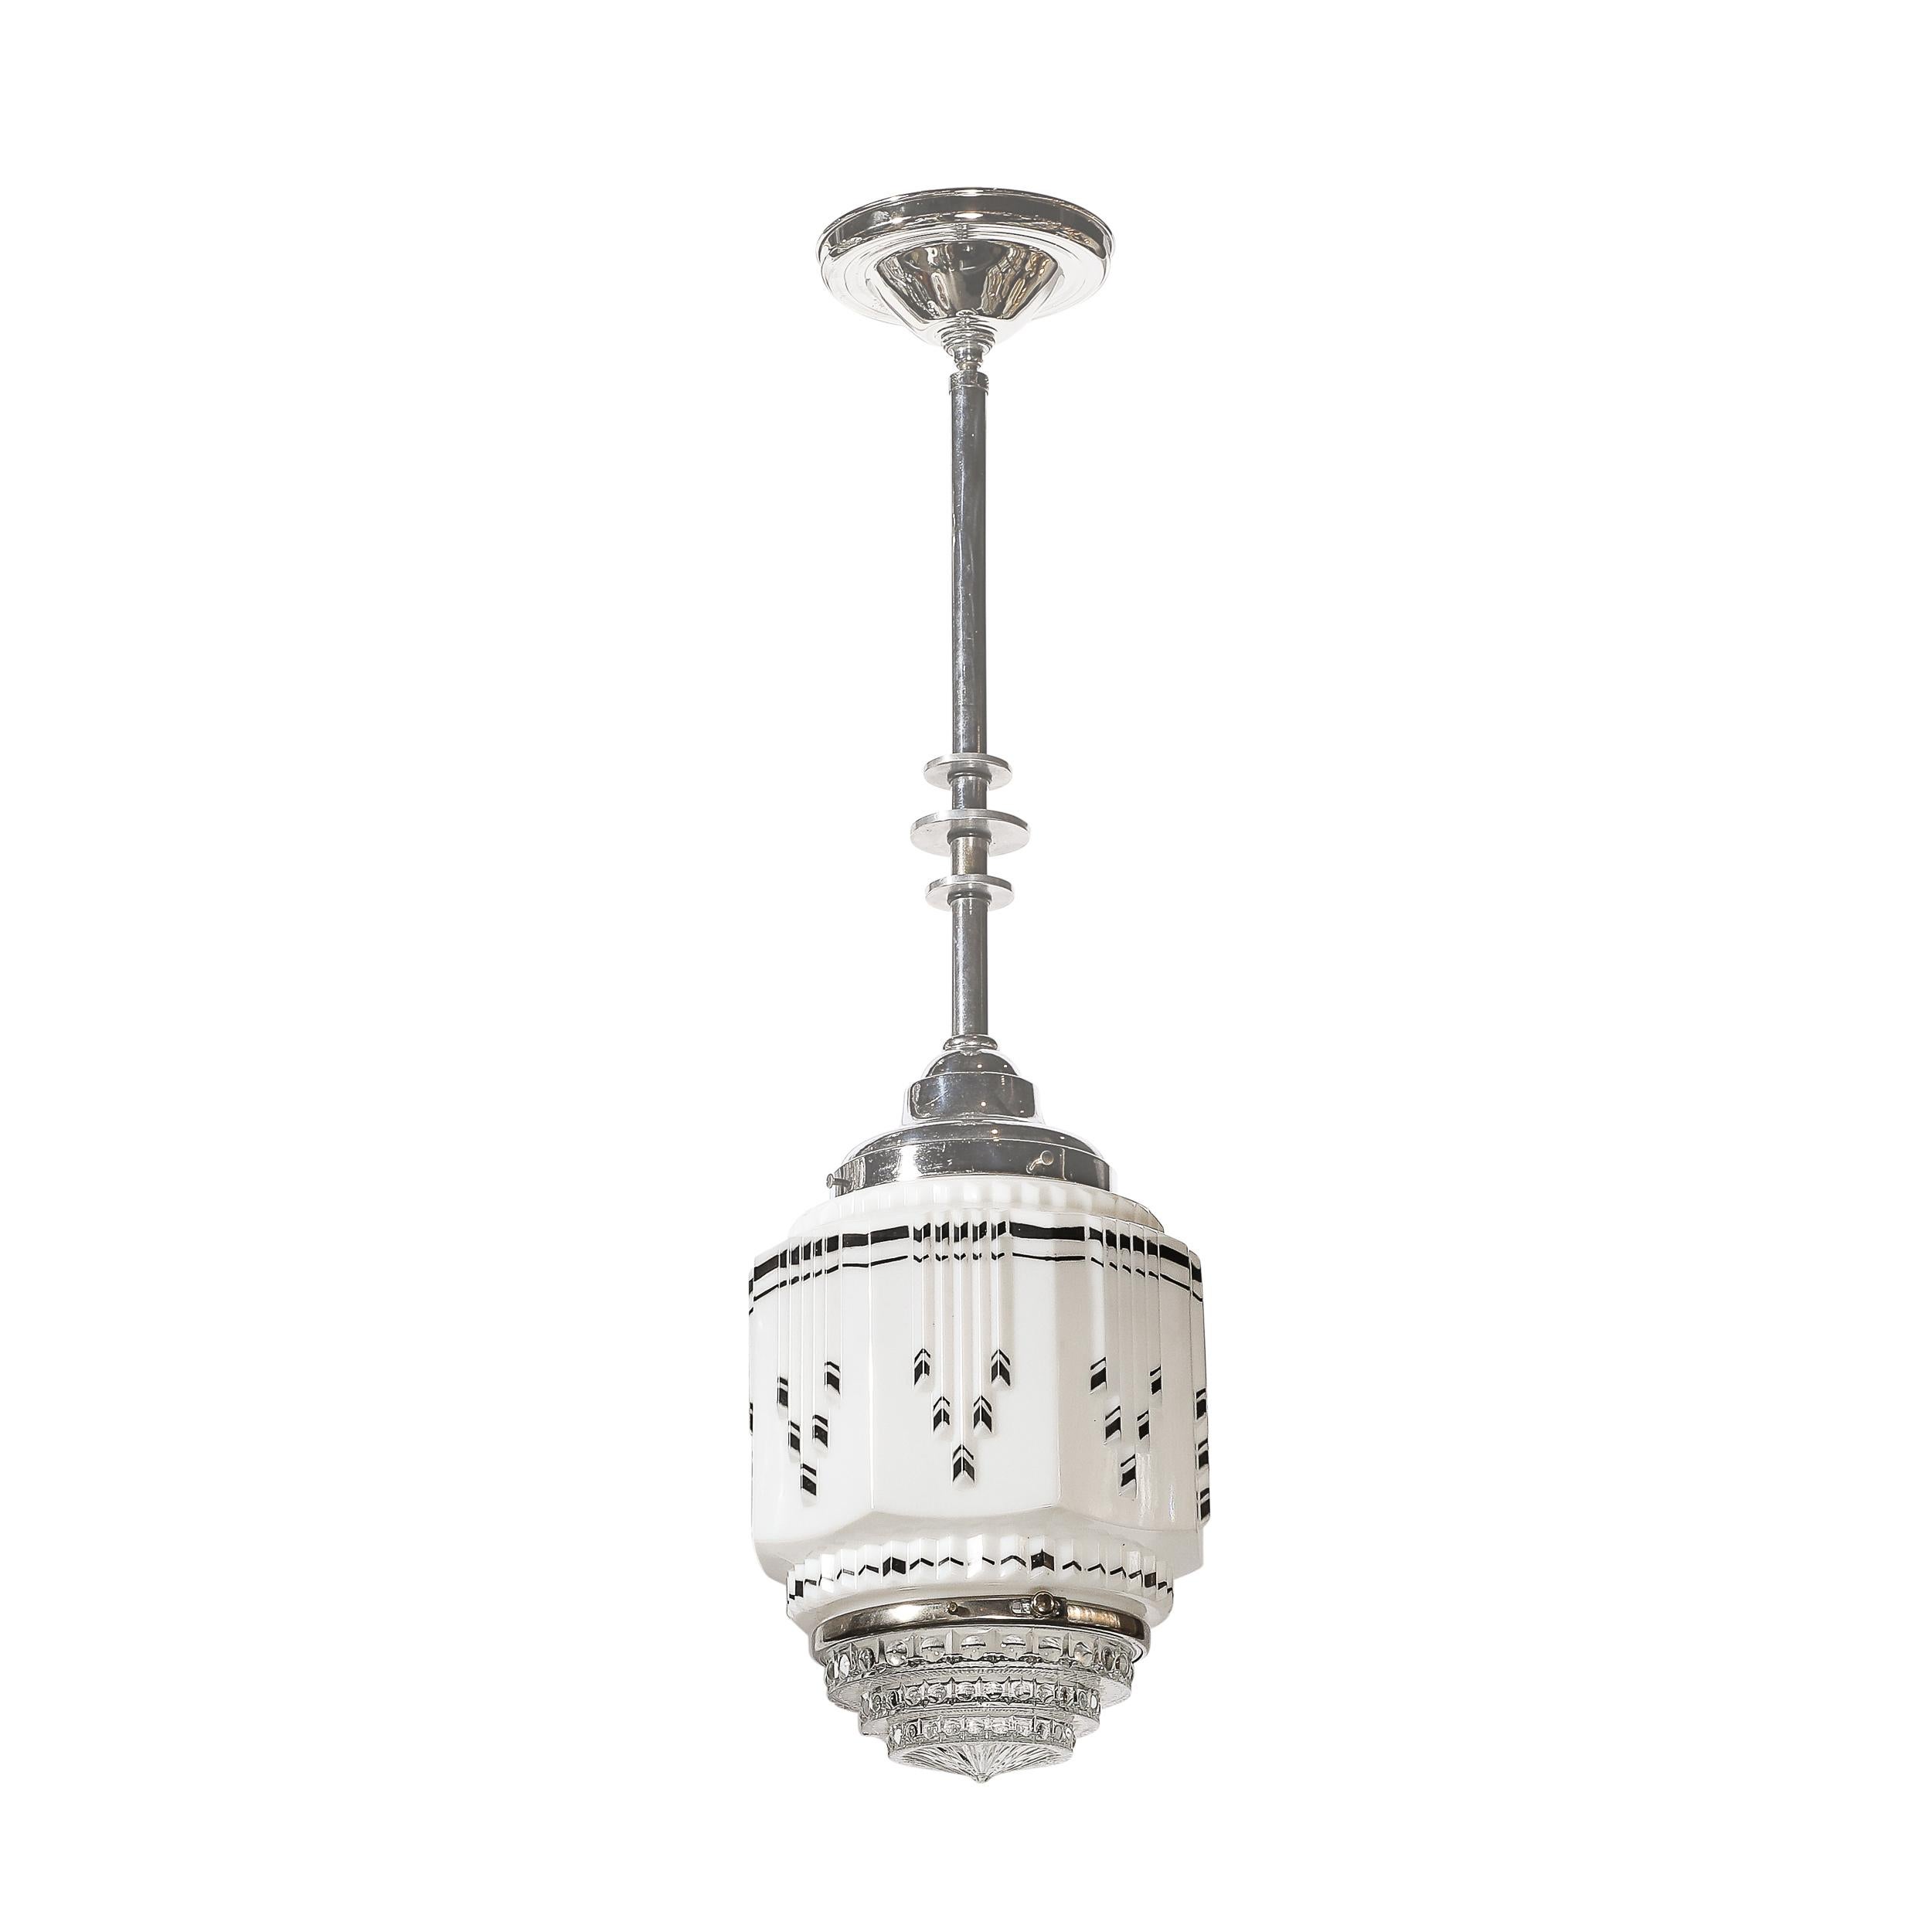 This beautiful and materially exquisite Pair of Art Deco Skyscraper Style Milk Glass Pendant Chandeliers with Black Enameled Detailing & Chrome Fittings originates from the United States, Circa 1935. They features a timeless geometric composition